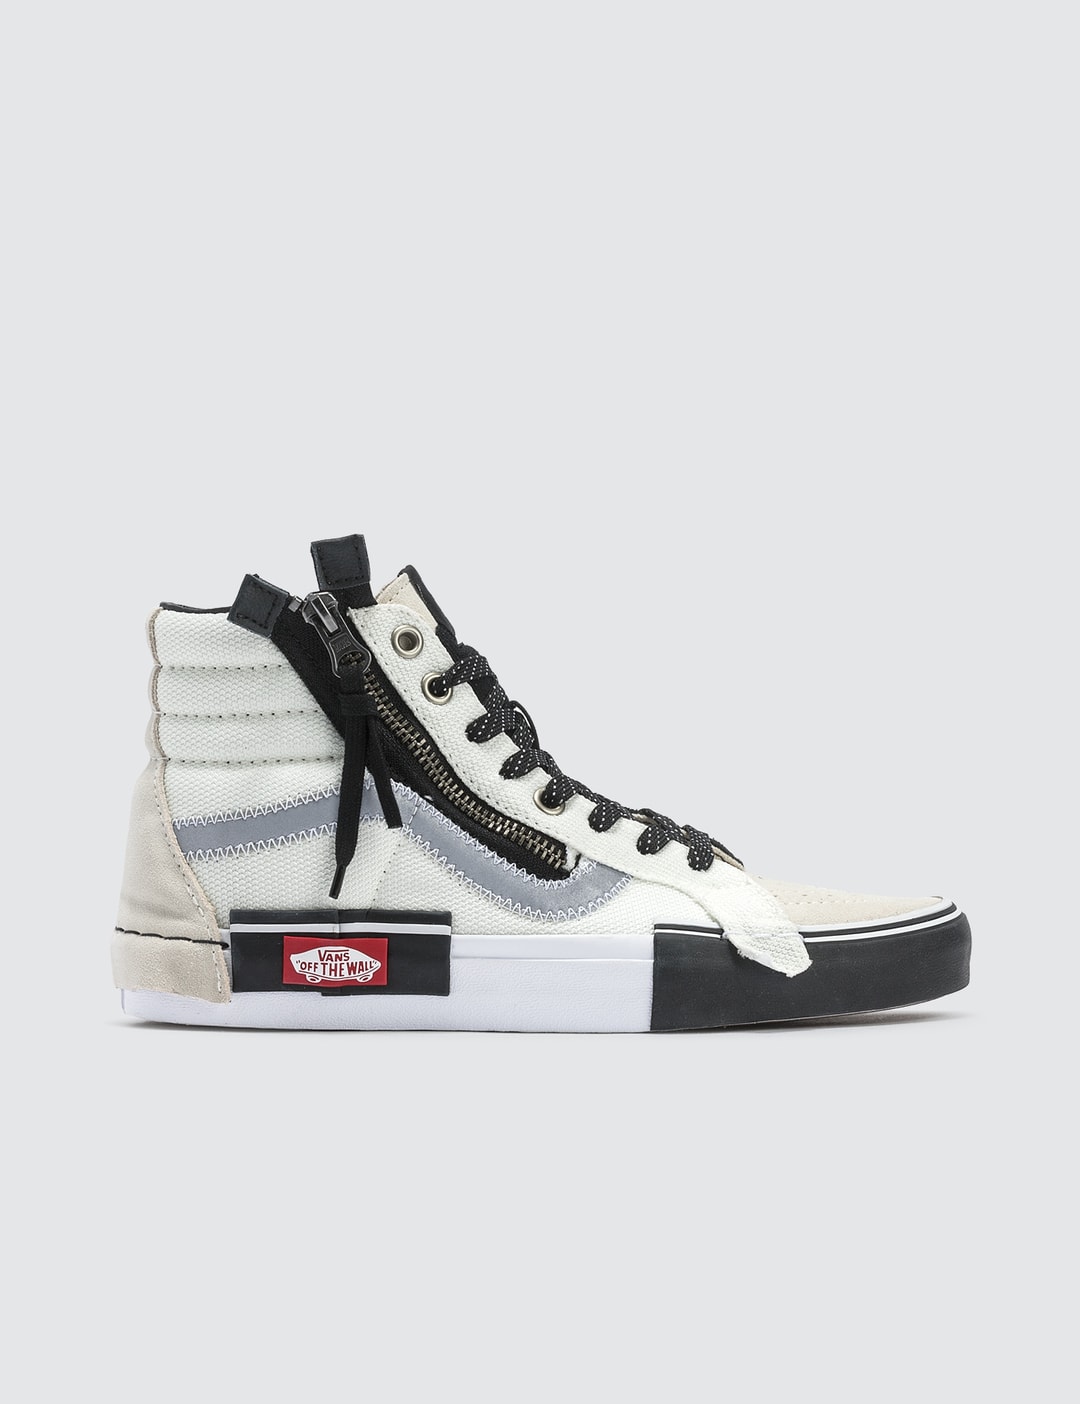 Vans - Sk8-Hi Reissue Cap | HBX - Globally Curated Fashion Lifestyle by Hypebeast